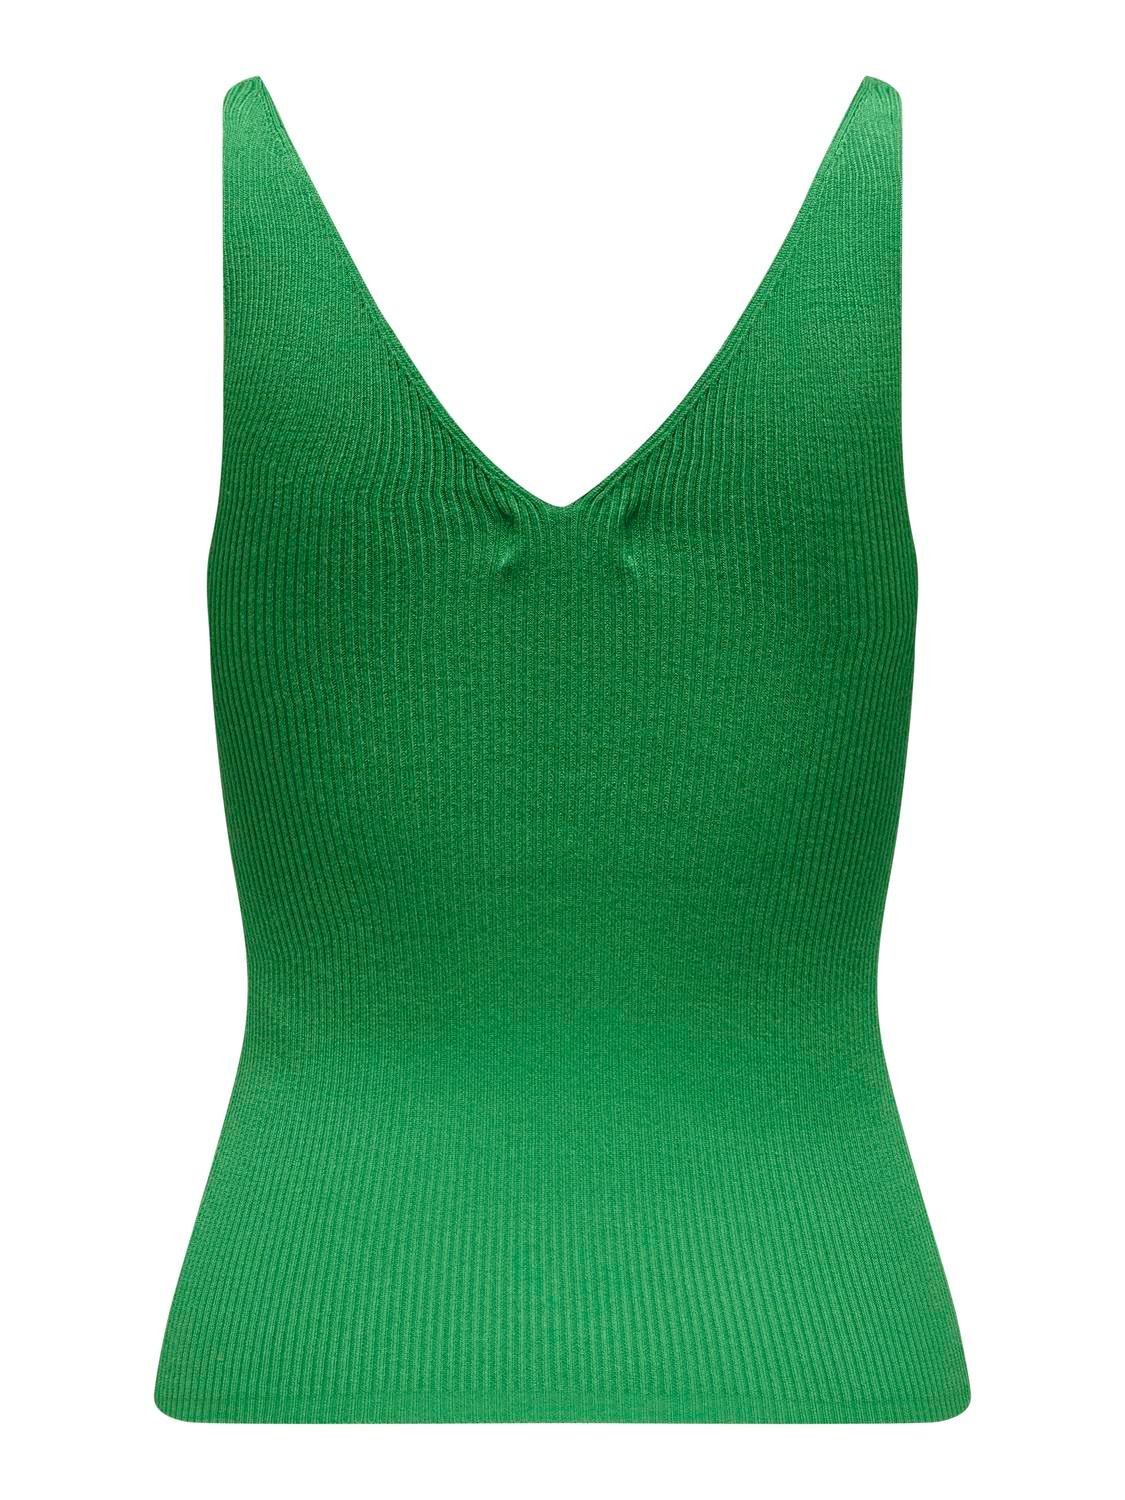 ONLY V-neck Top -Green Bee - 15180497